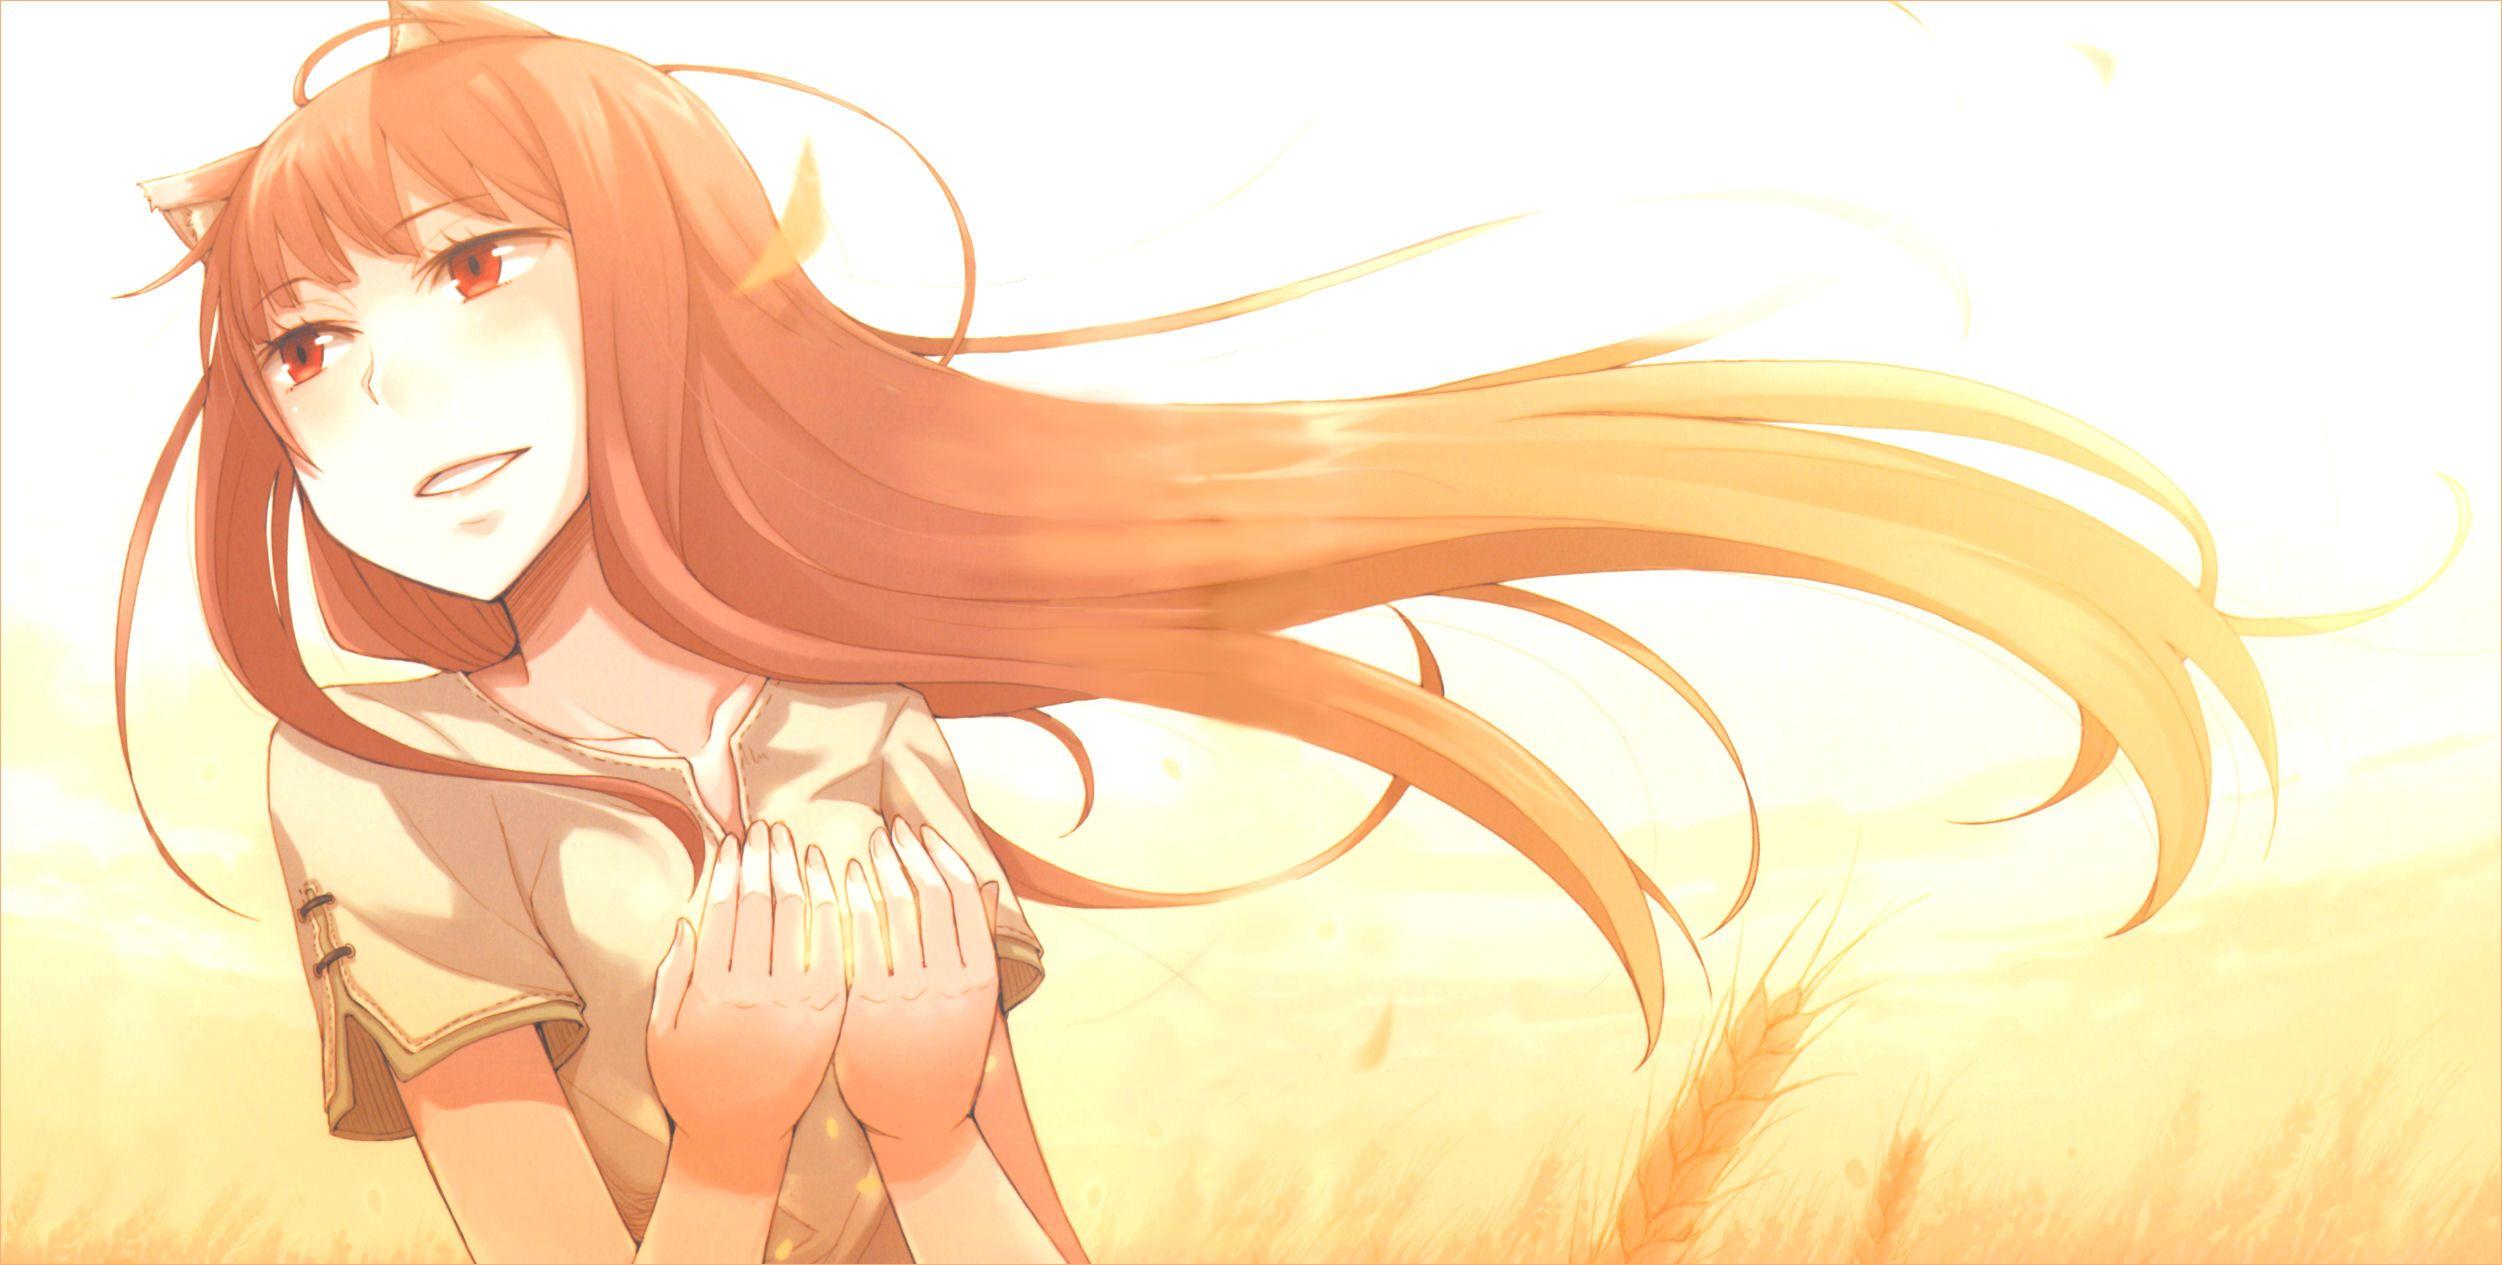 Spice And Wolf Wallpaper HD Download. Spice and Wolf